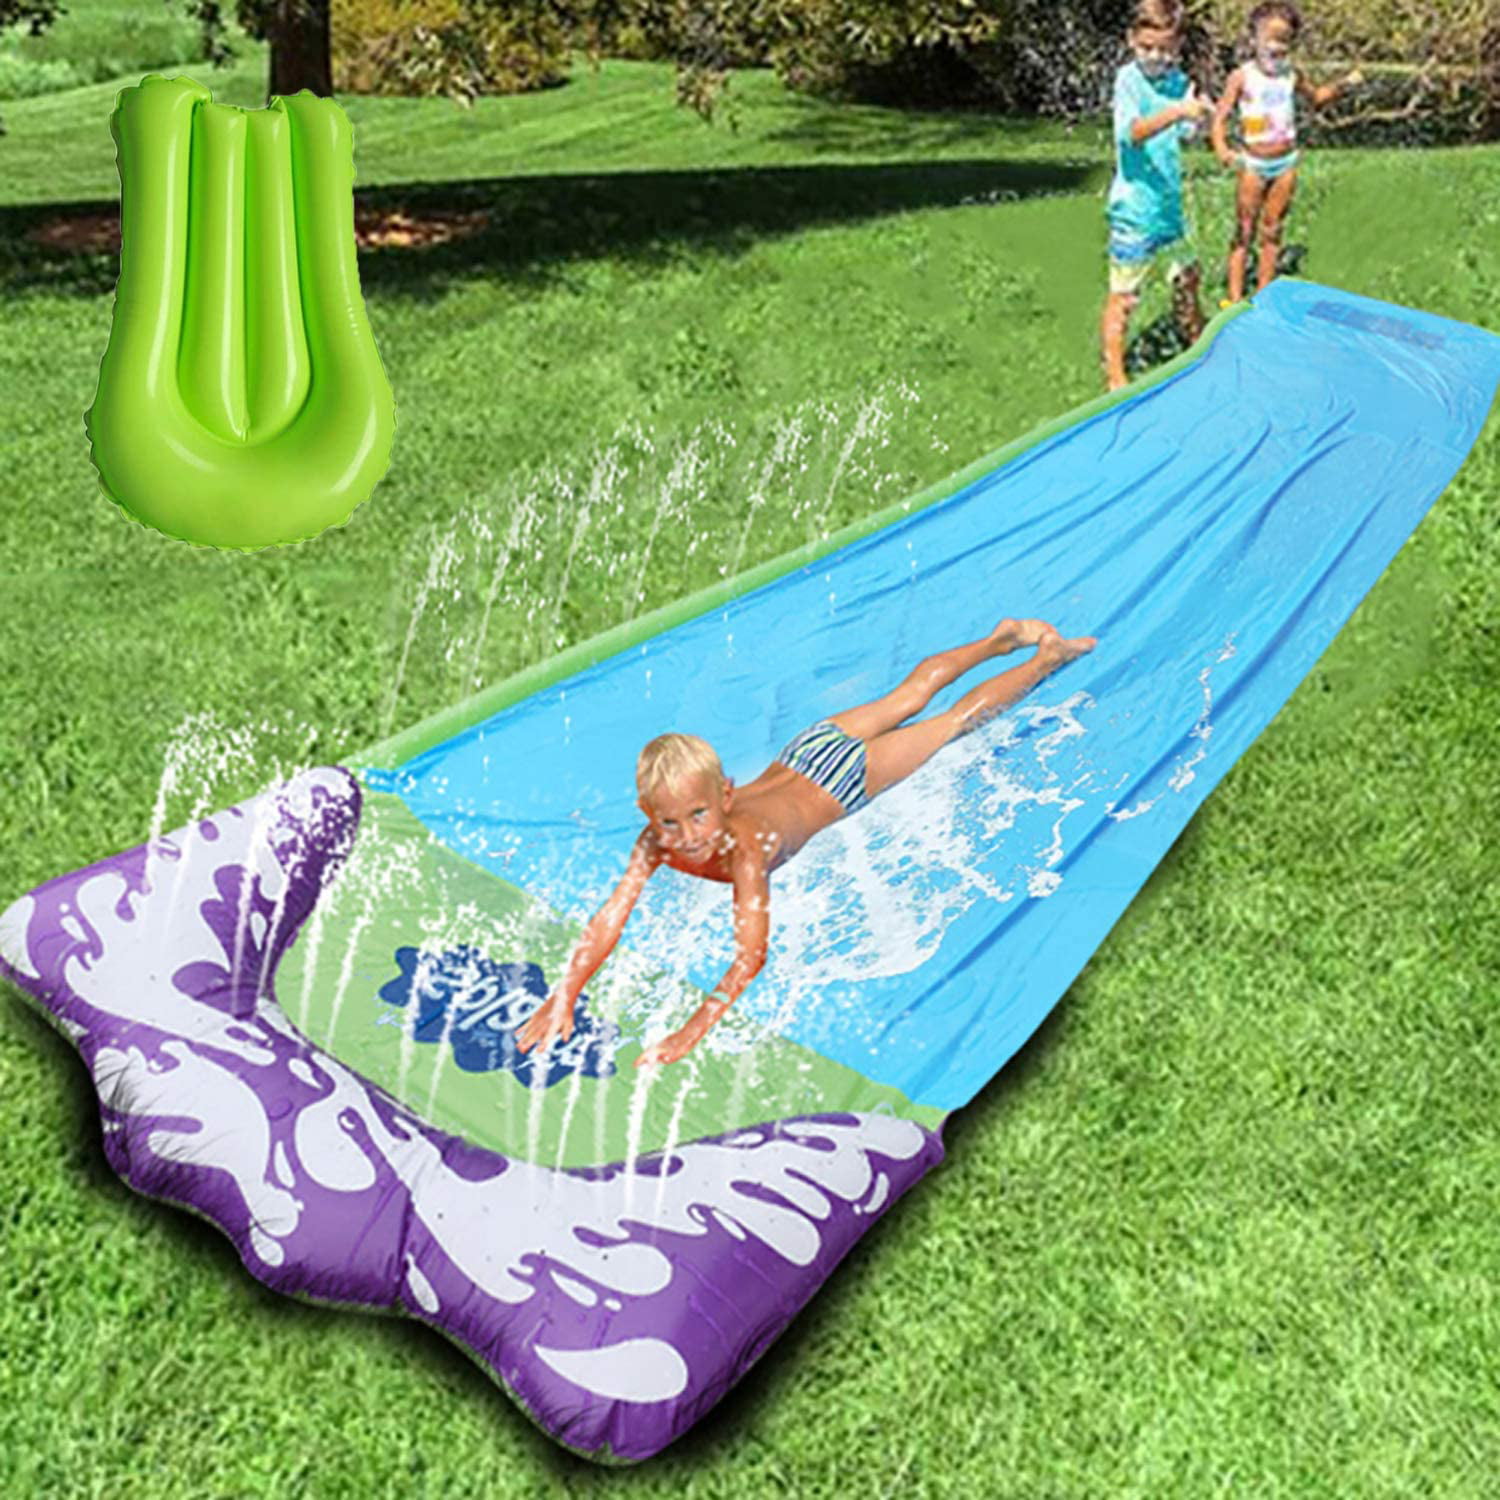 DERMIBEST Water Slide with Spray Splash Pool and Water Spraying Side Rails Slip and Slide Racing Path Kid Child Play Water inflated Slip n Slide for Kids Backyard.